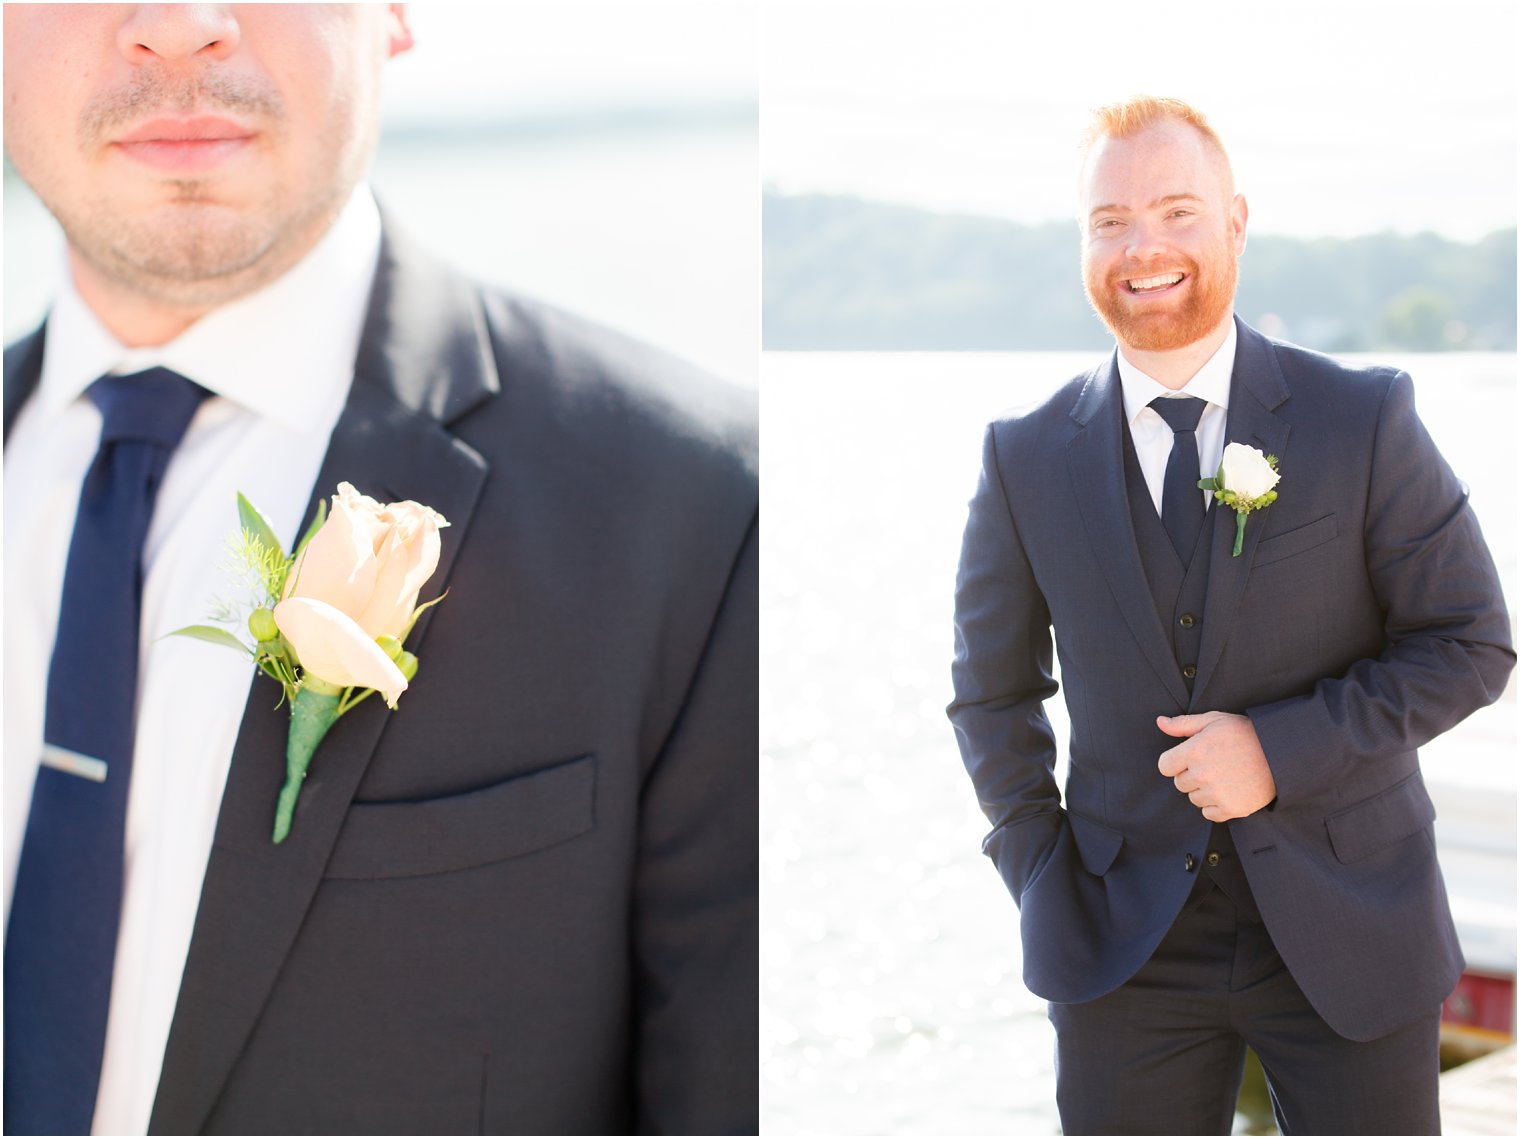 coral and navy wedding inspiration for groom by Idalia Photography